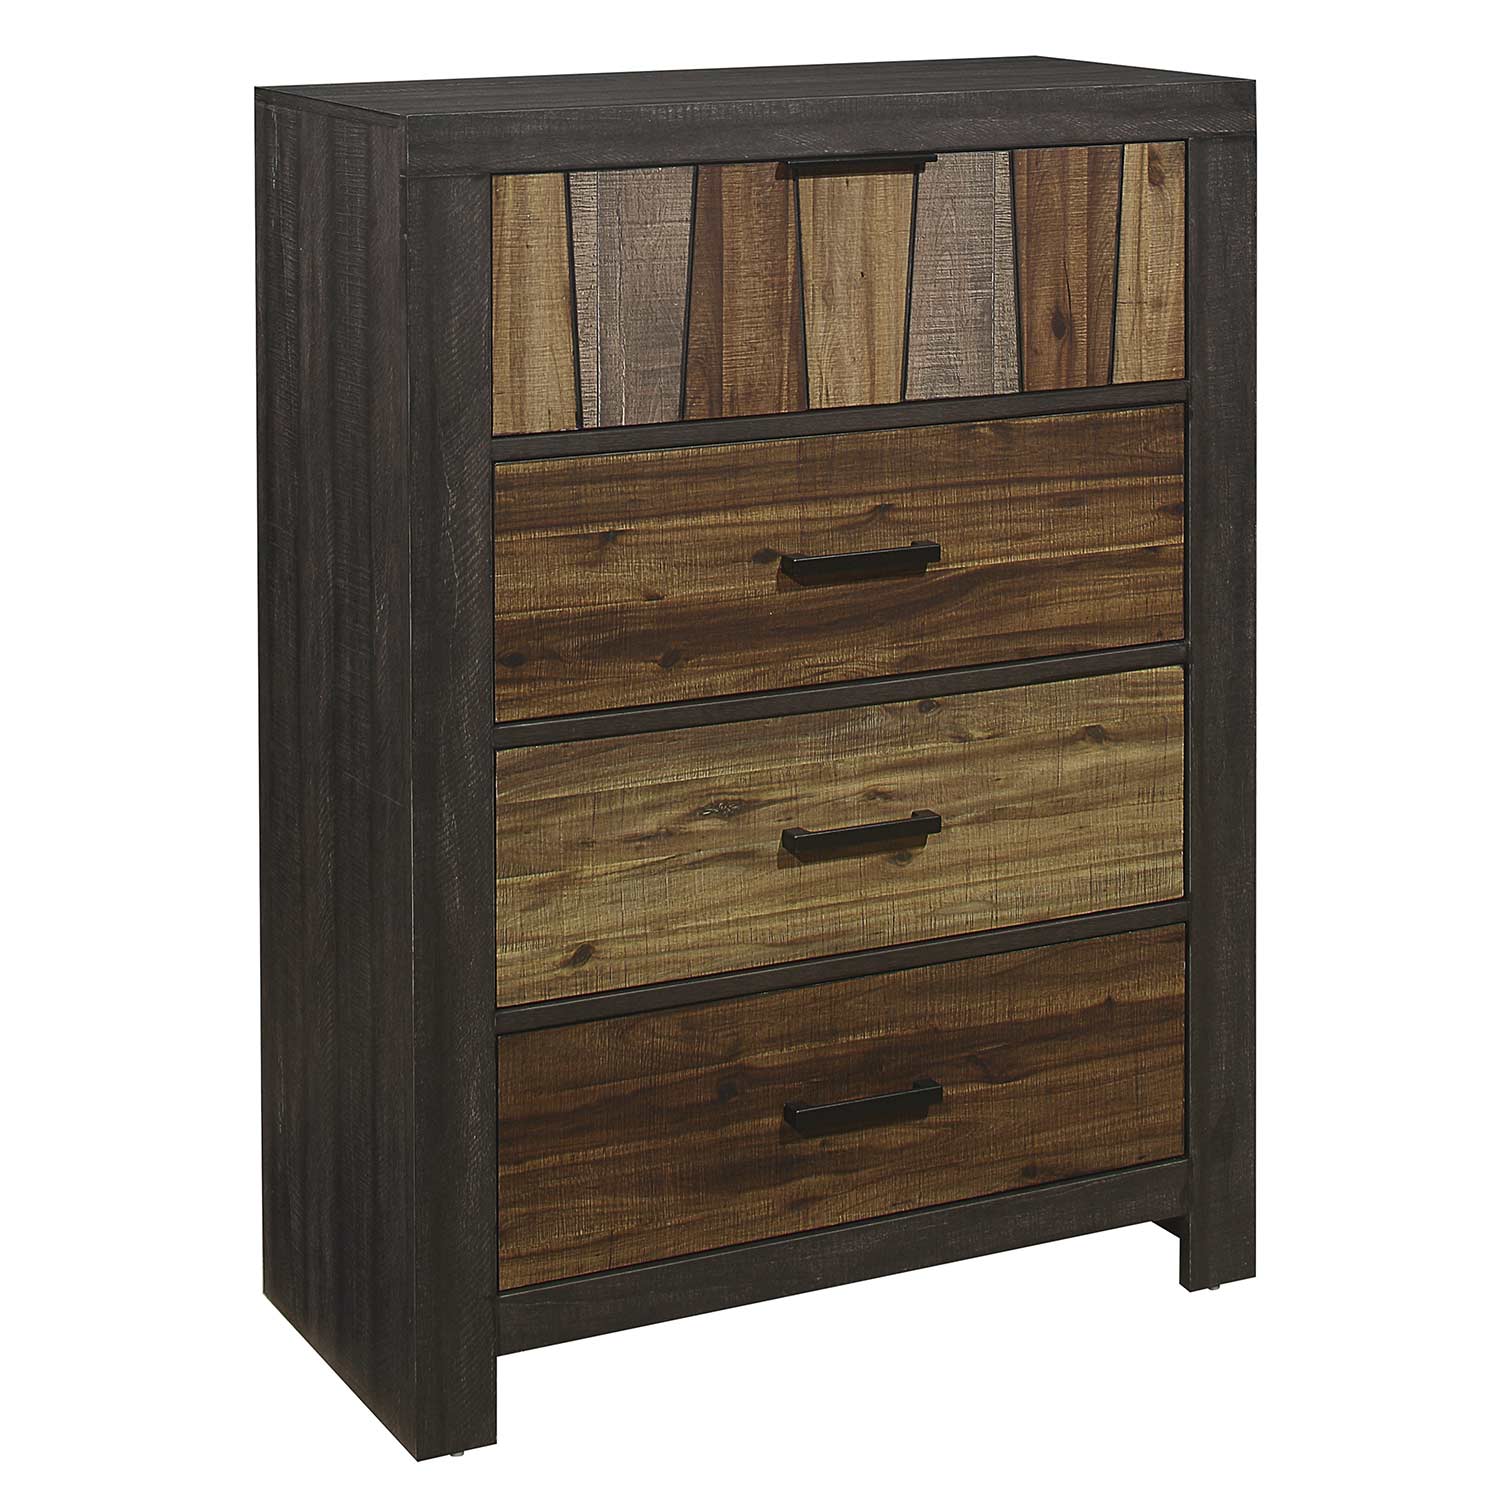 Homelegance Cooper Chest - Wire-brushed multi-tone